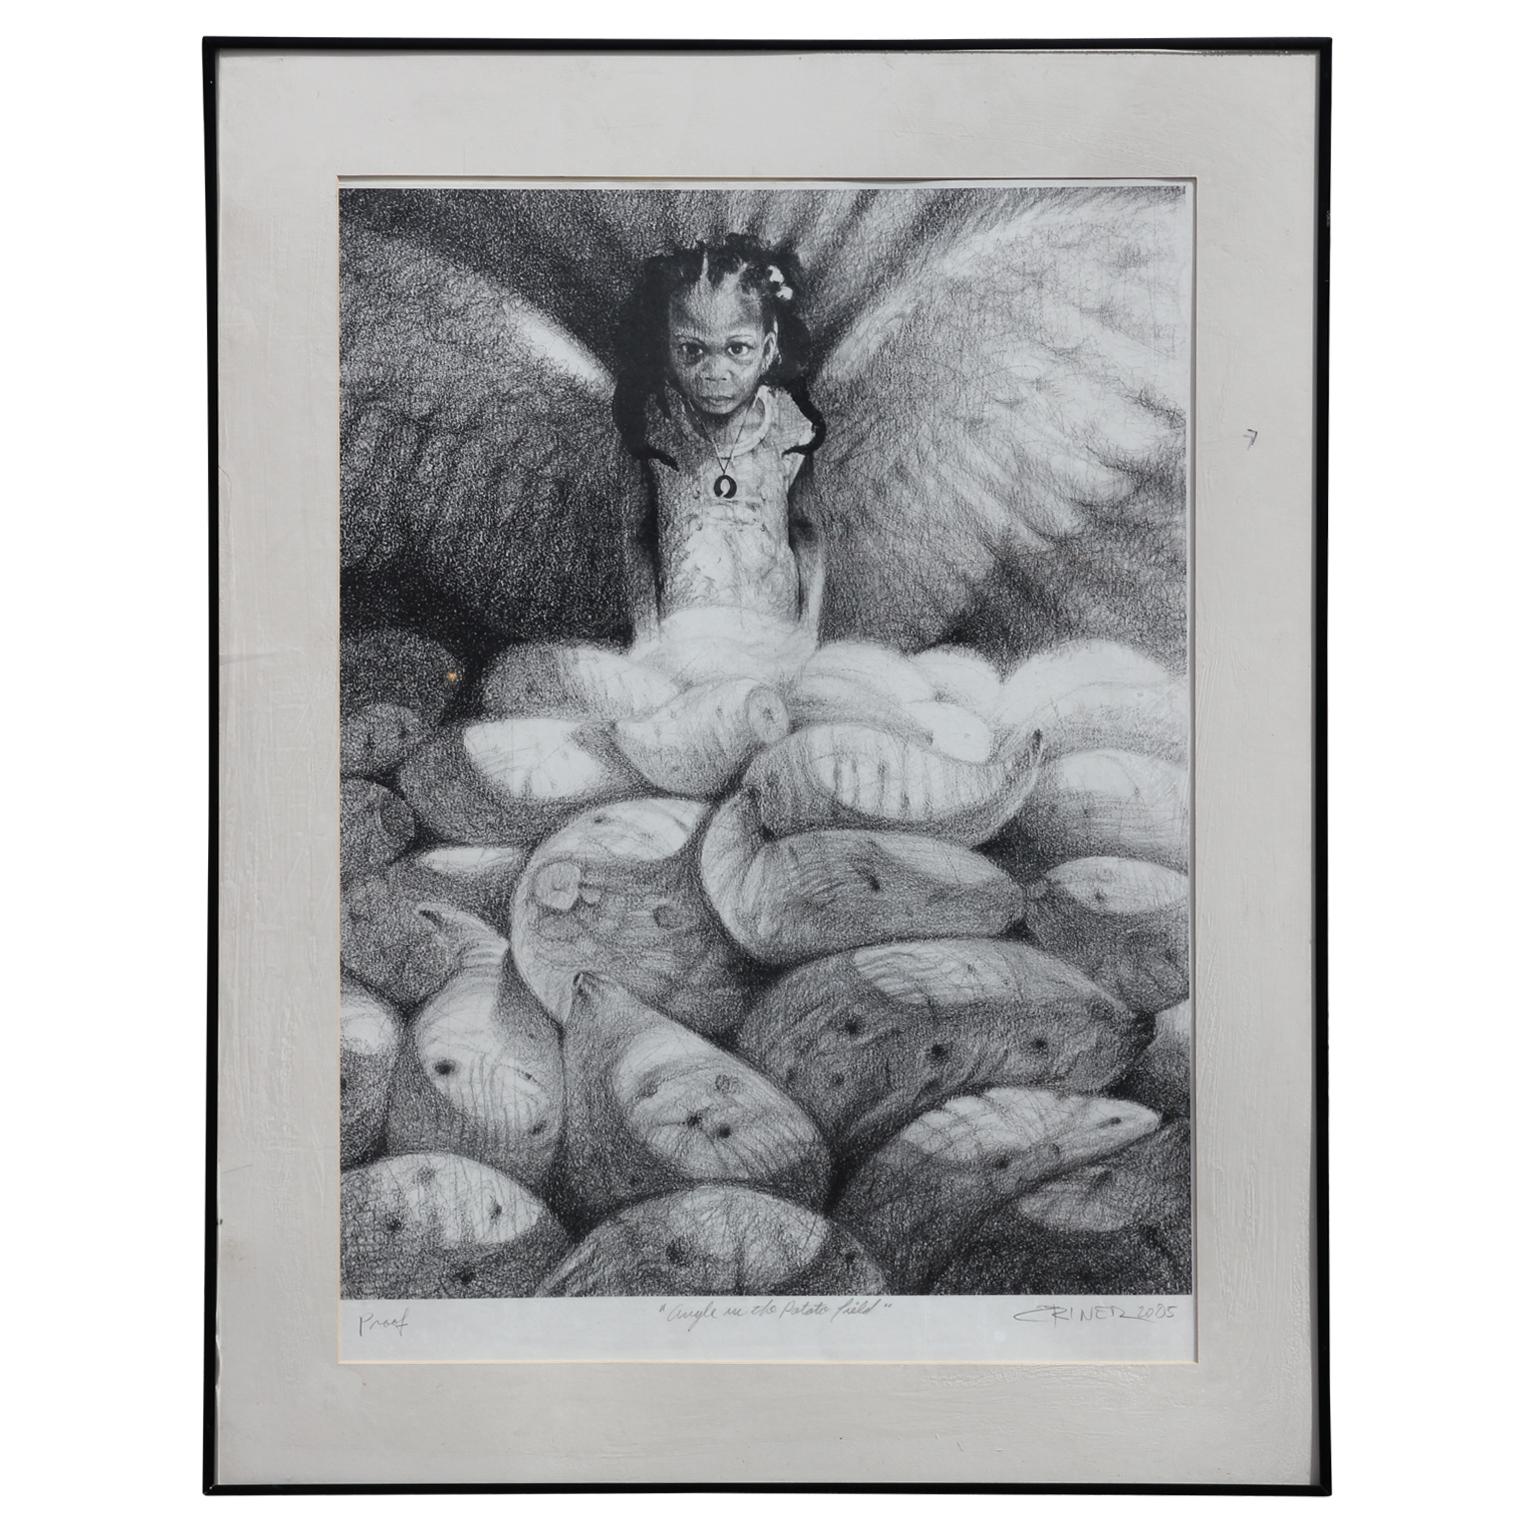 Charles Criner  Abstract Print - "Angel in the Potato Field" Abstract Figurative Artist Proof